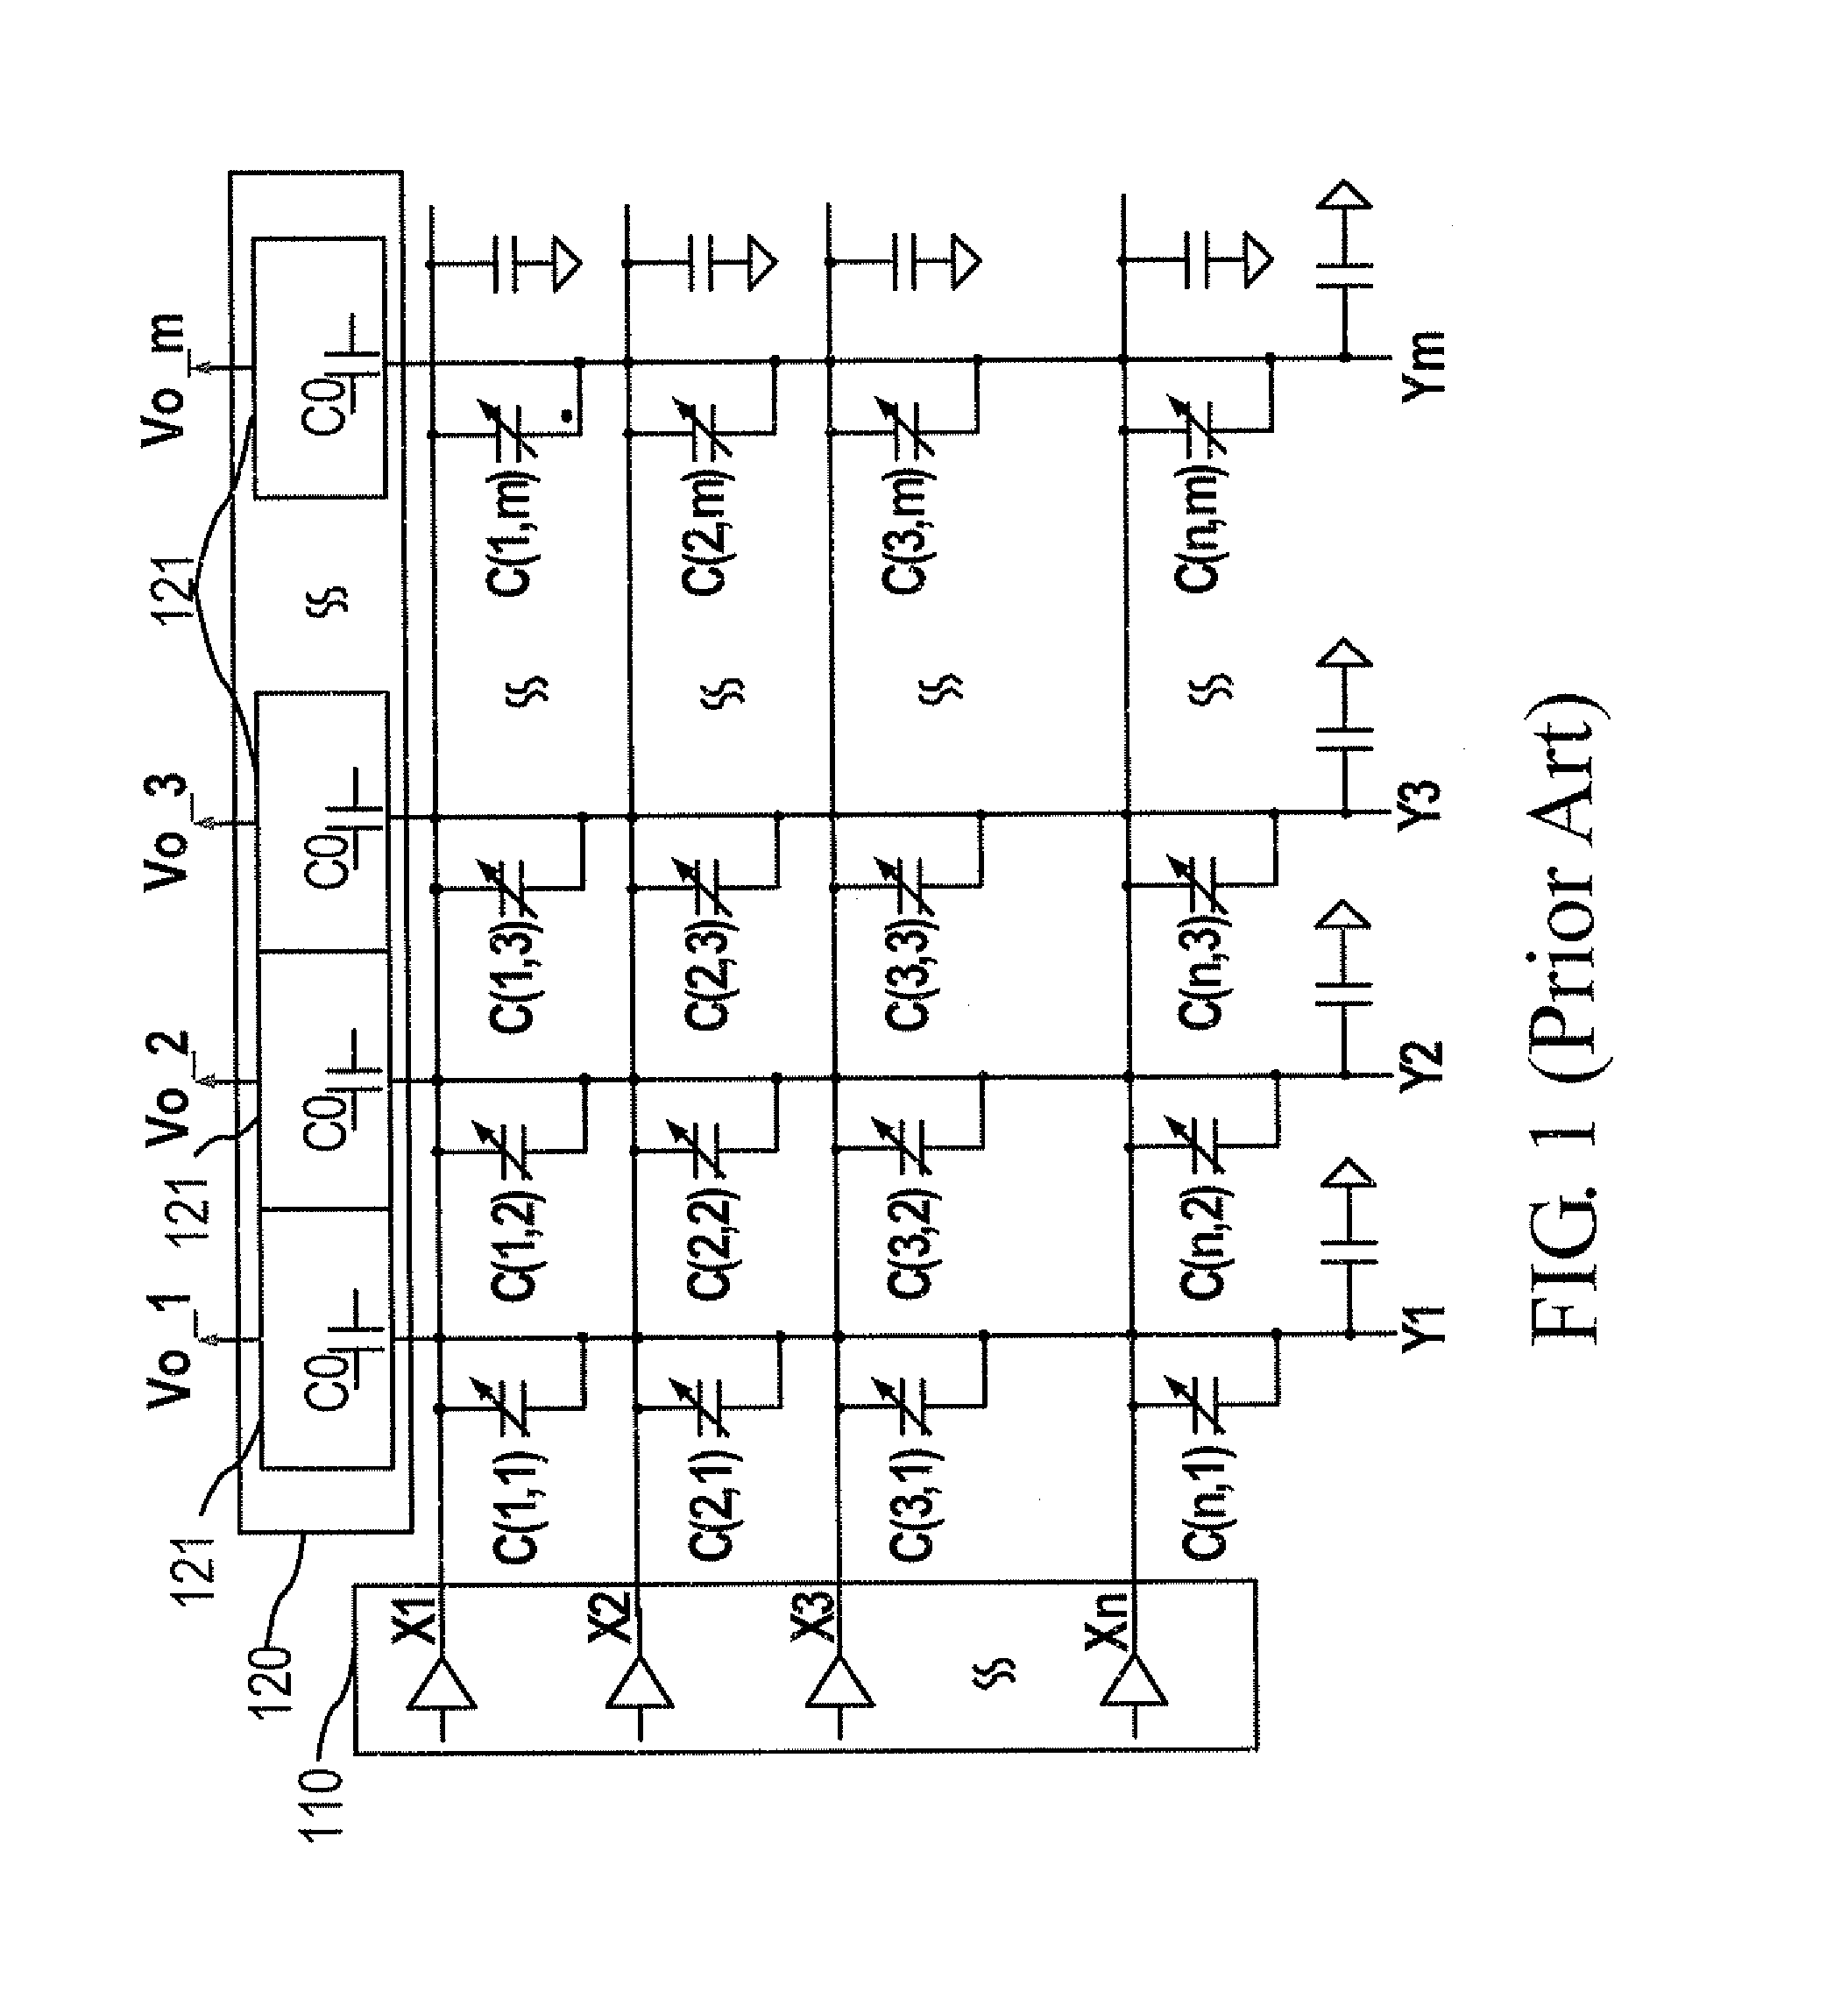 Demodulation method and system for a low-power differential sensing capacitive touch panel